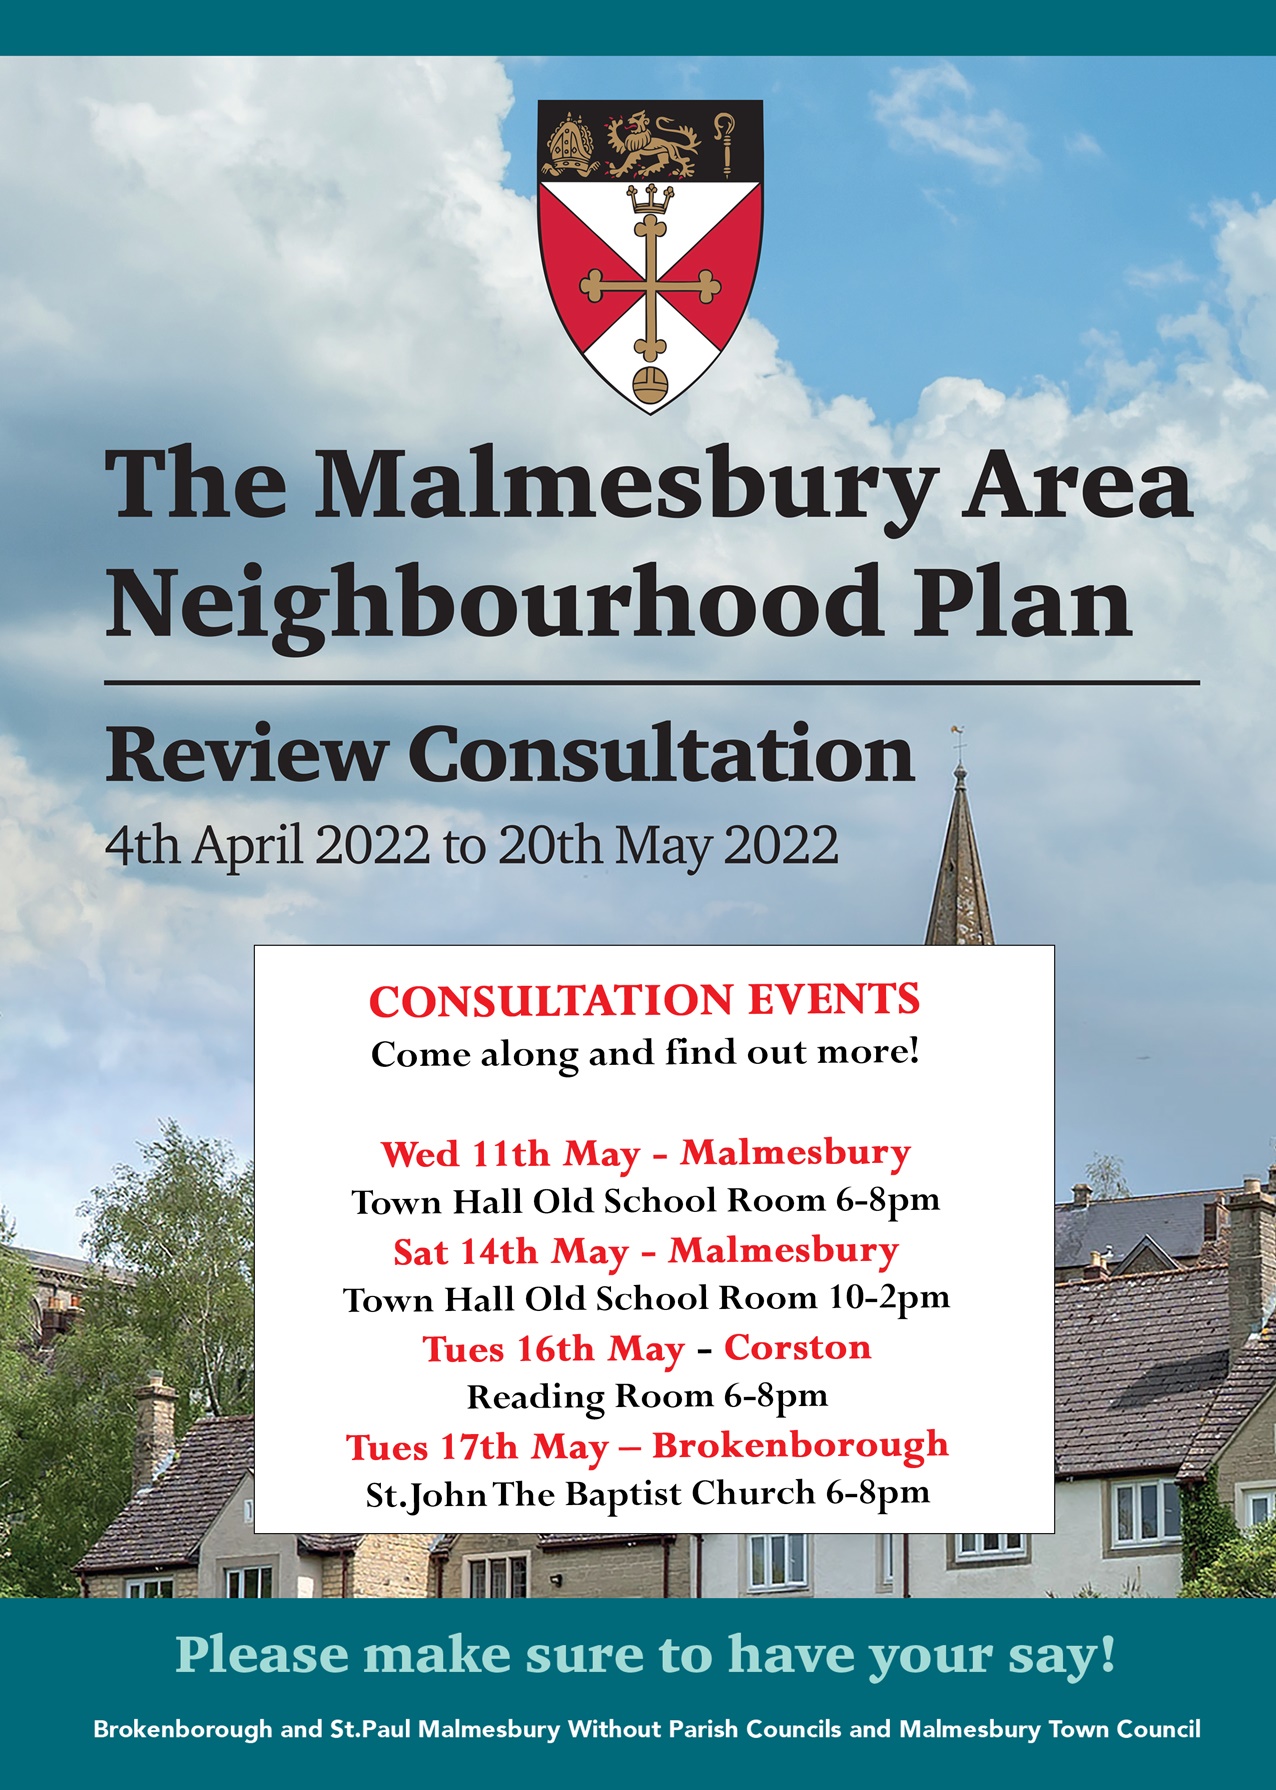 Last few days for your comments - Malmesbury Area Neighbourhood Plan